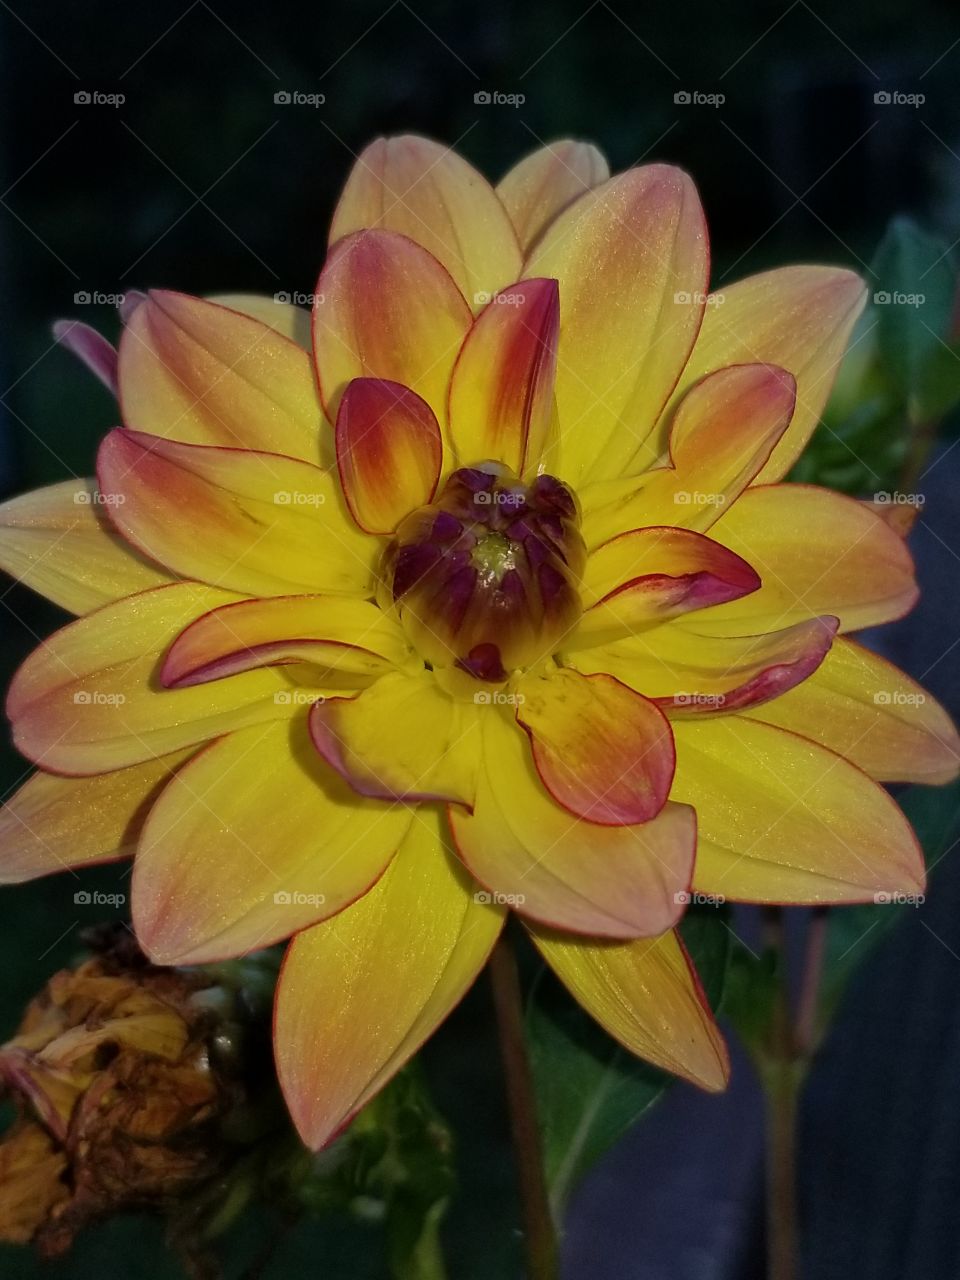 red and yellow dahlia flower